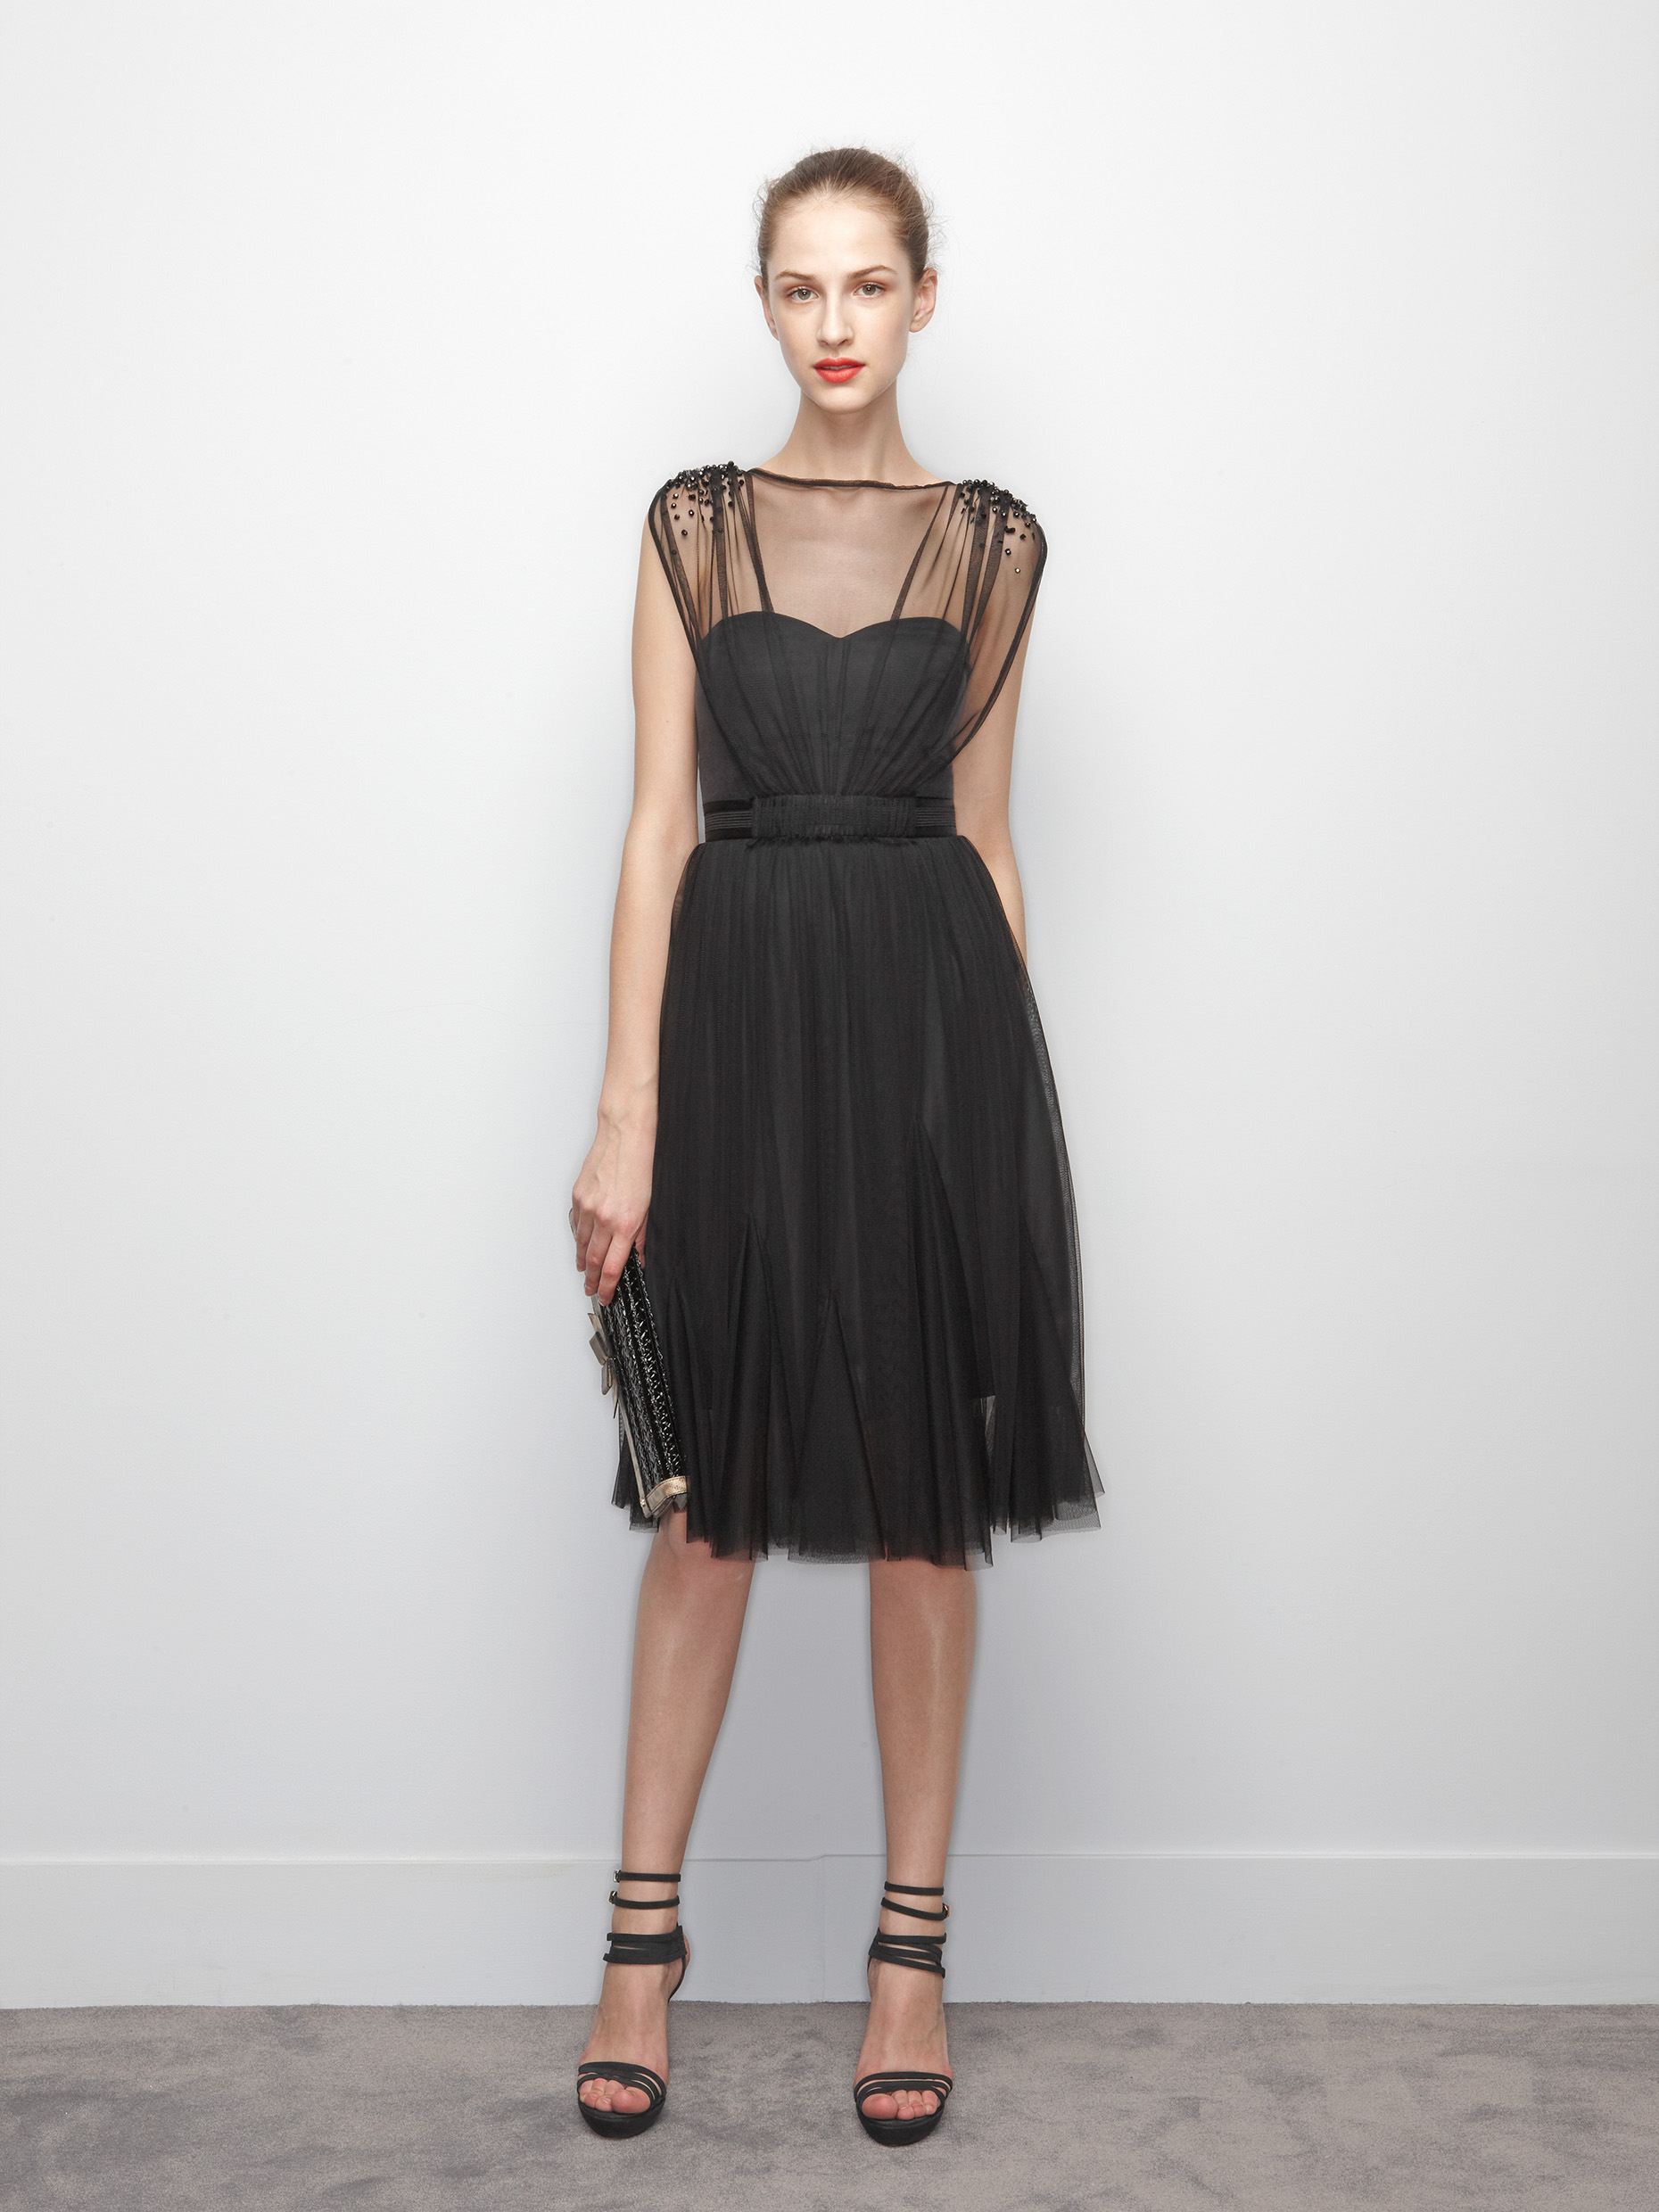 Viktor & Rolf Launches Black Dress Collection